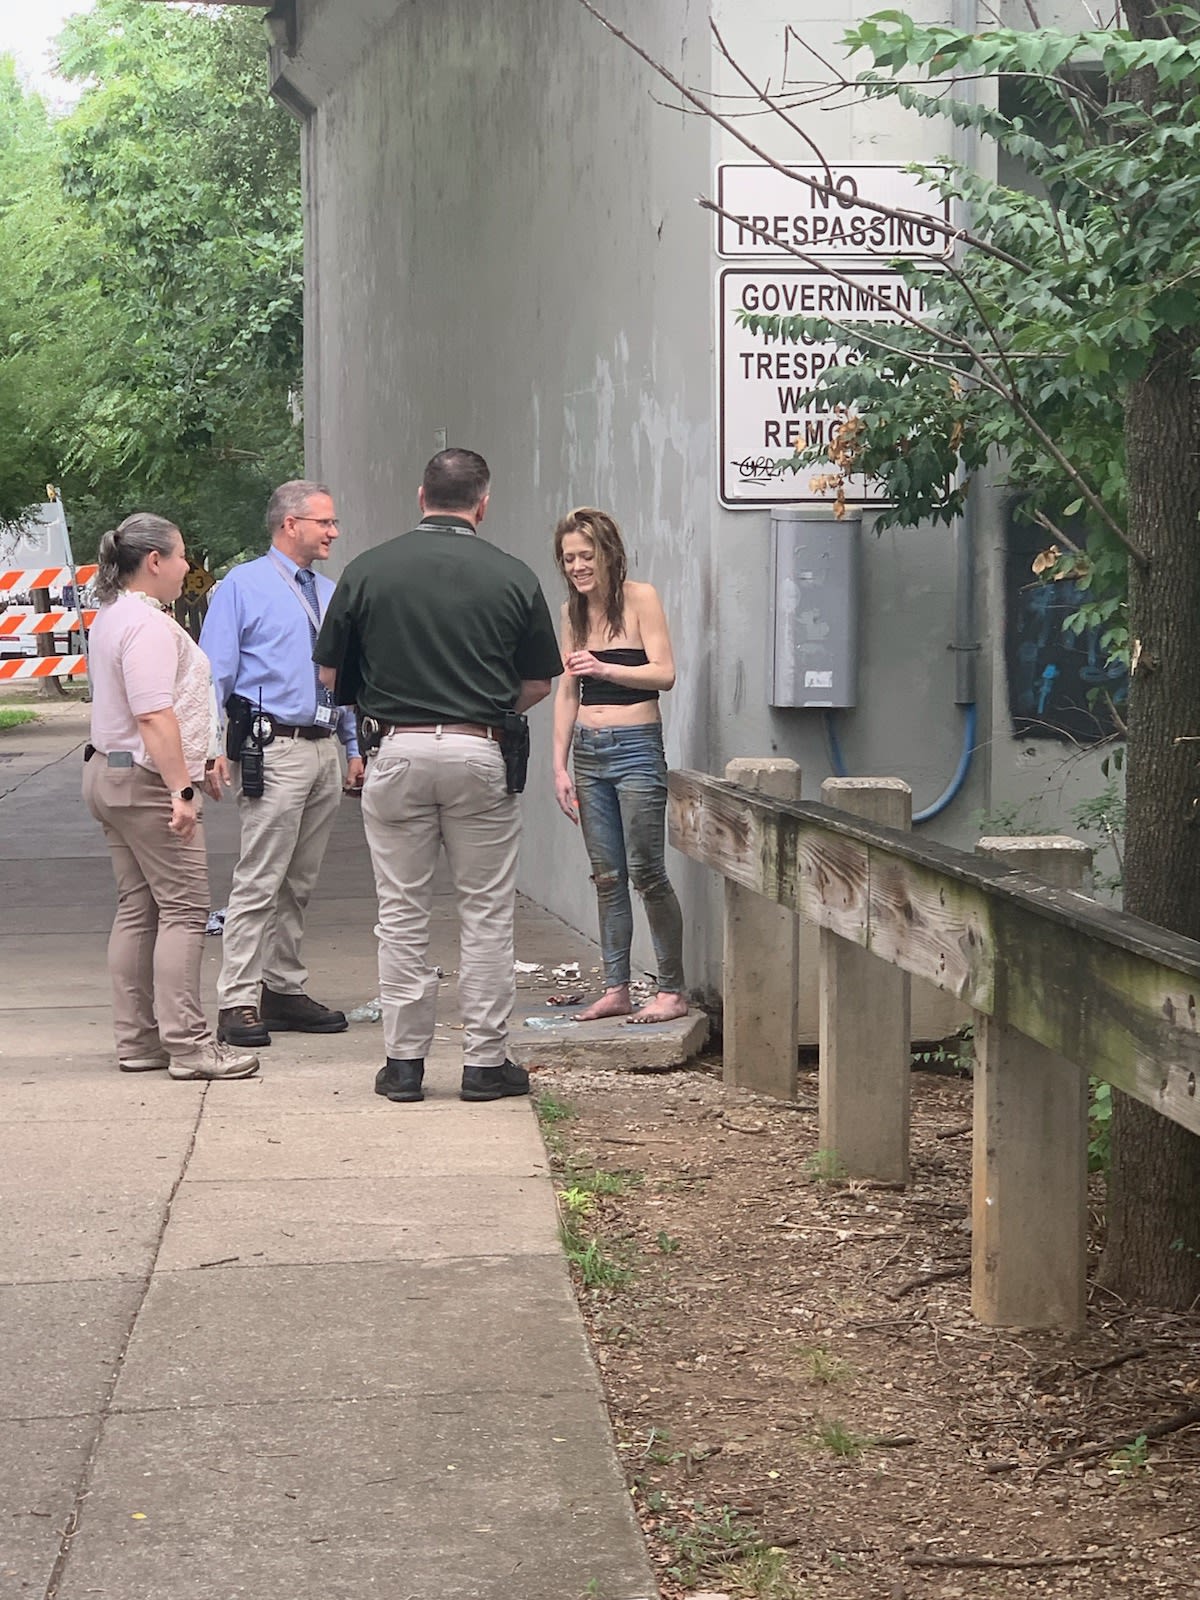 Missing tourist found alive after disappearing in Nashville - WBBJ TV